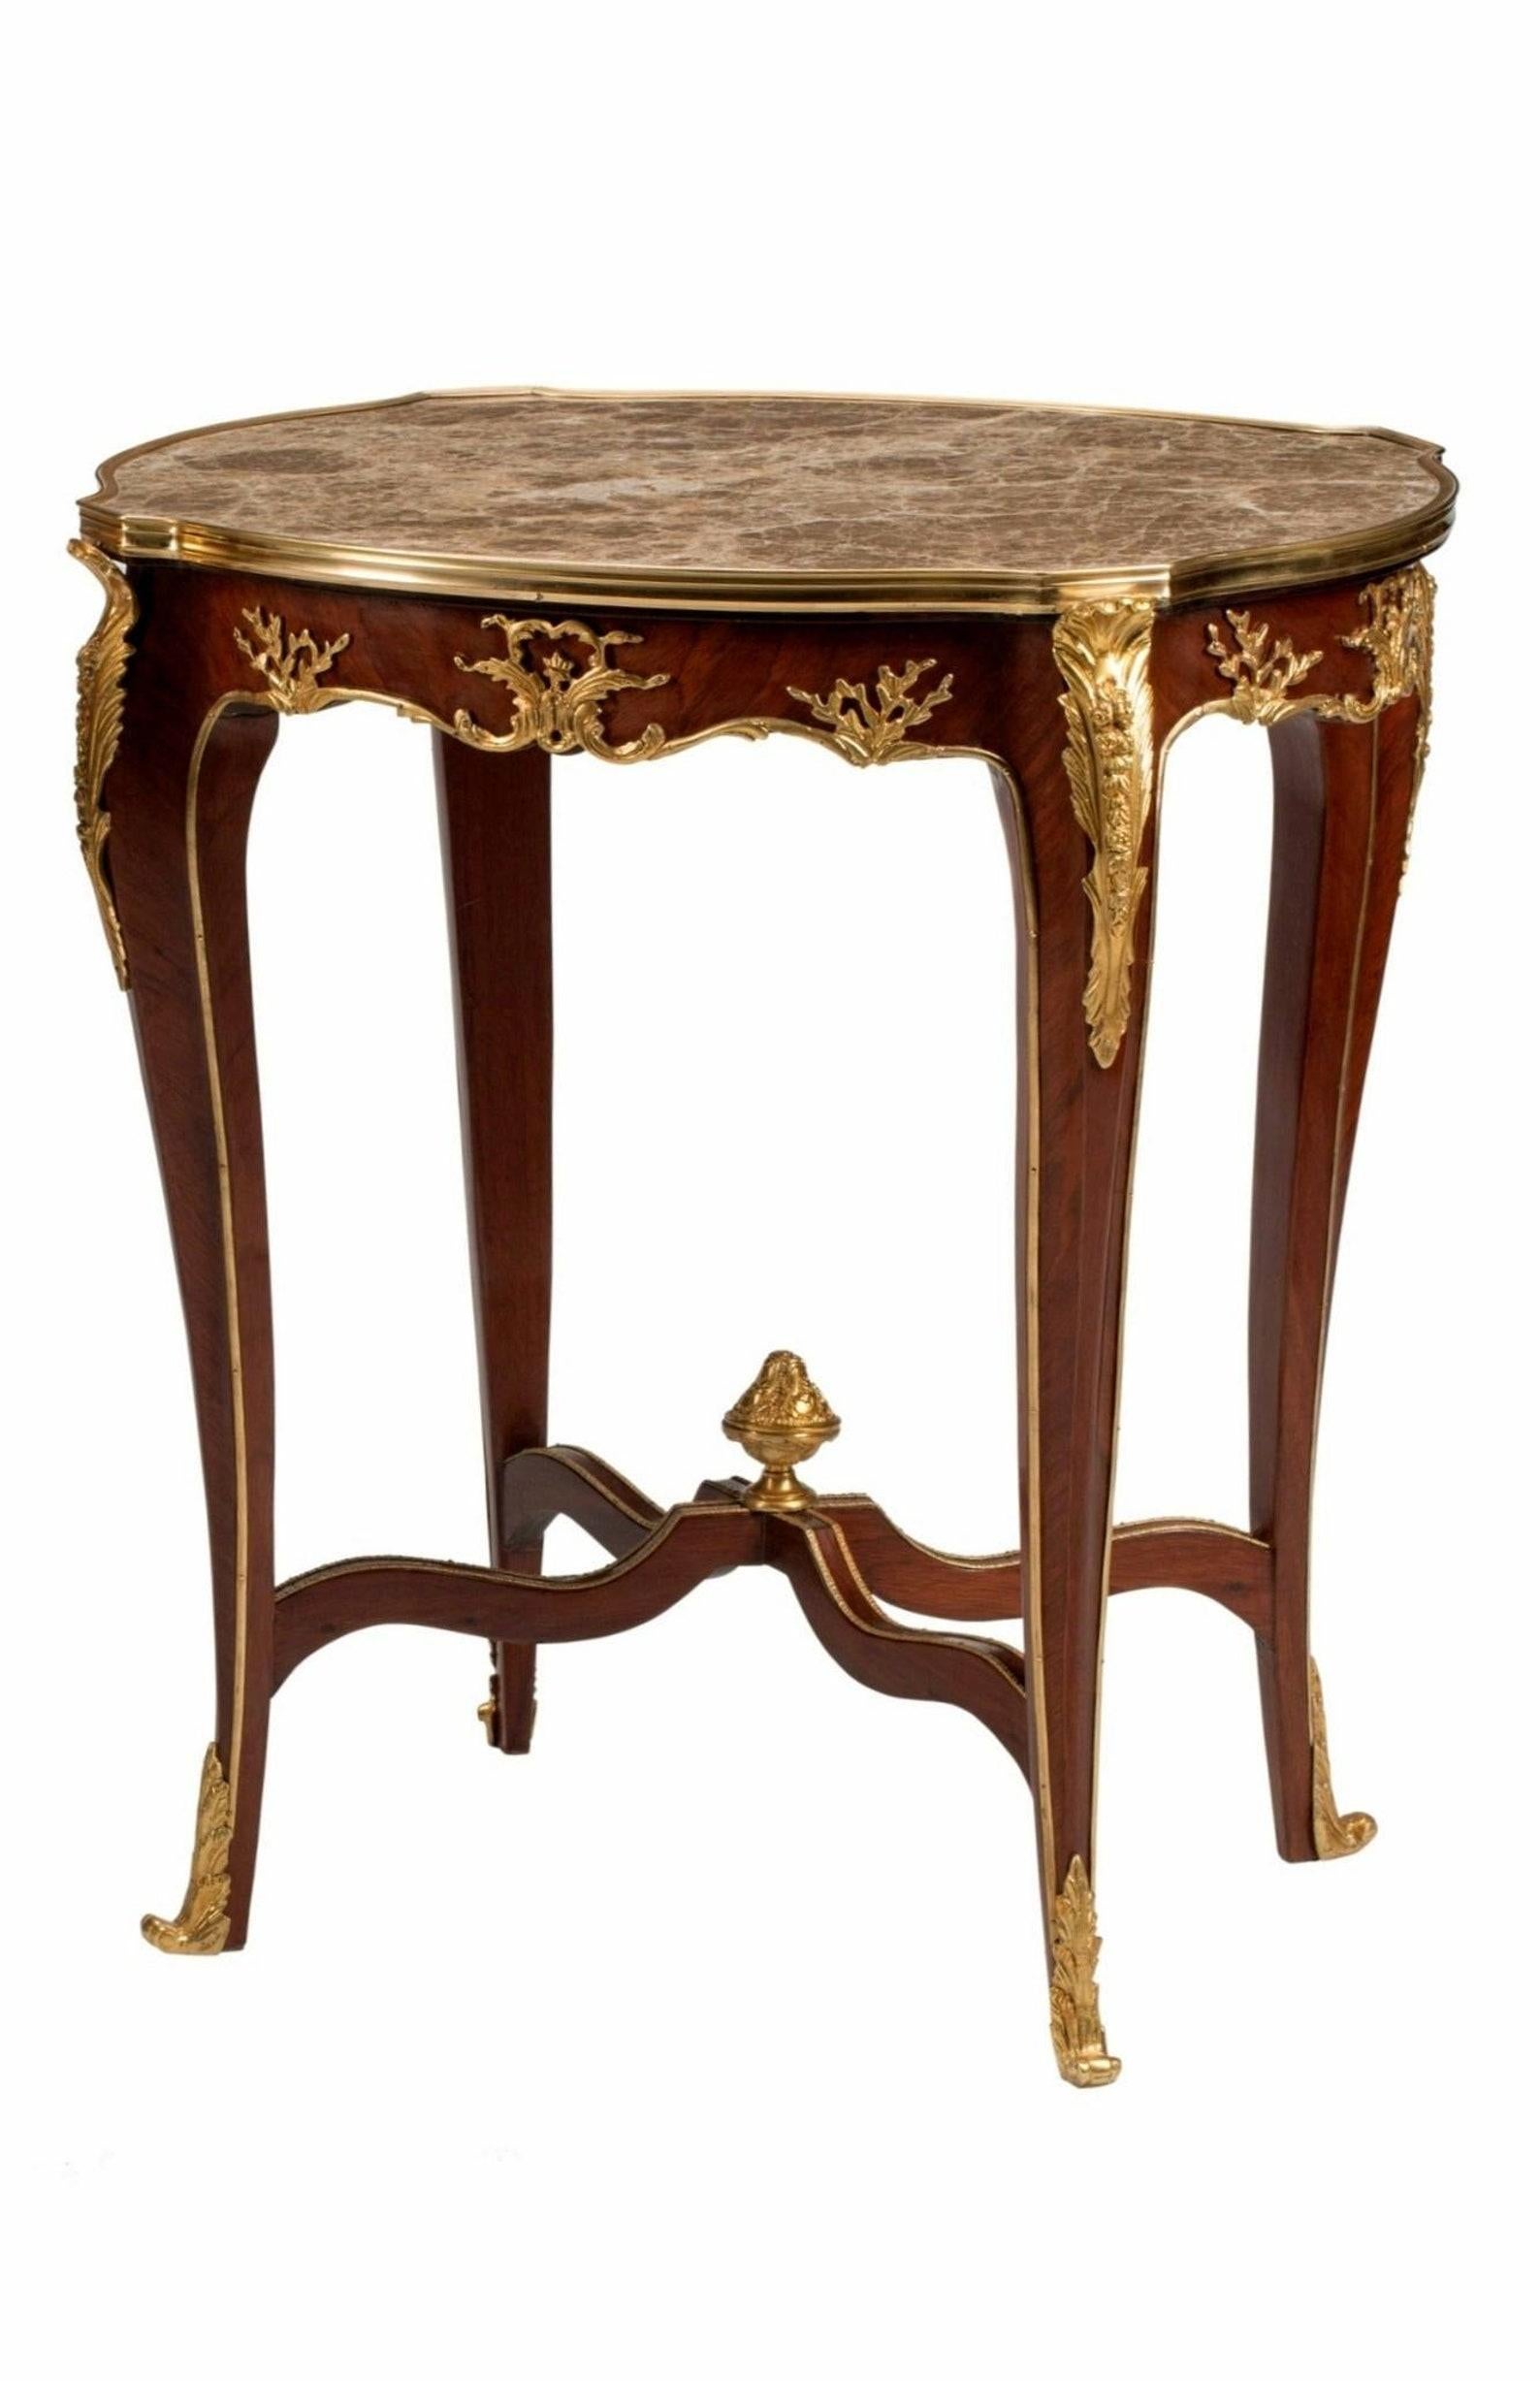 A pair of magnificent fine quality vintage French Louis XV style gilt bronze ormolu mounted mahogany side tables after celebrated master Parisian ébéniste Francois Linke (b.1855-1946)

Exquisitely hand-crafted in the late 20th century, exceptionally